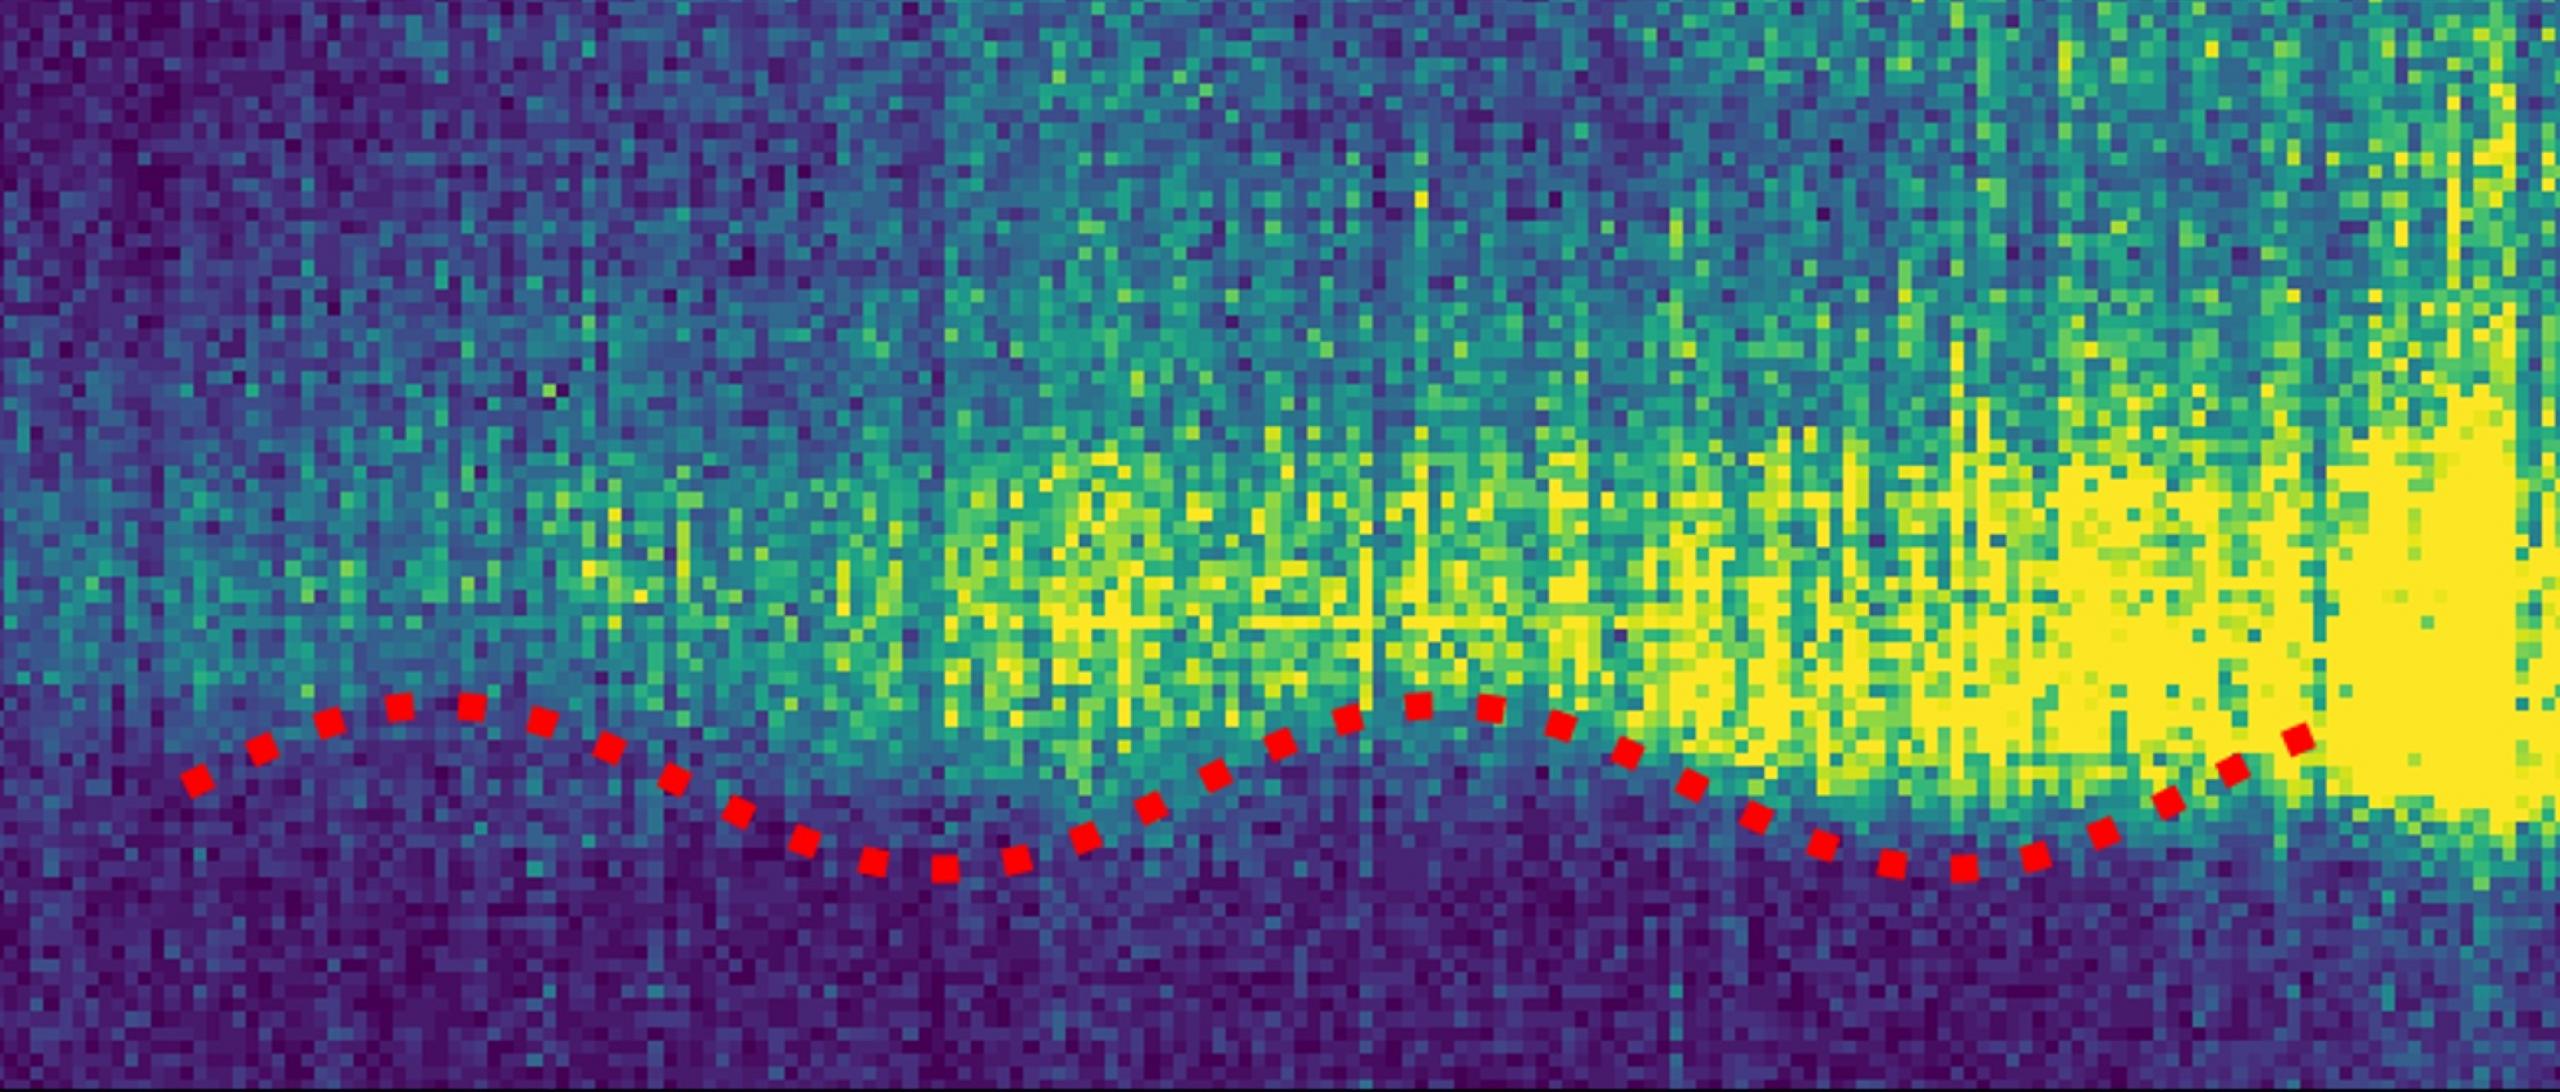 Colorful image representing the distance that amateur radio operators can communicate and how that changes over time. Red dots represent a wave-like pattern.